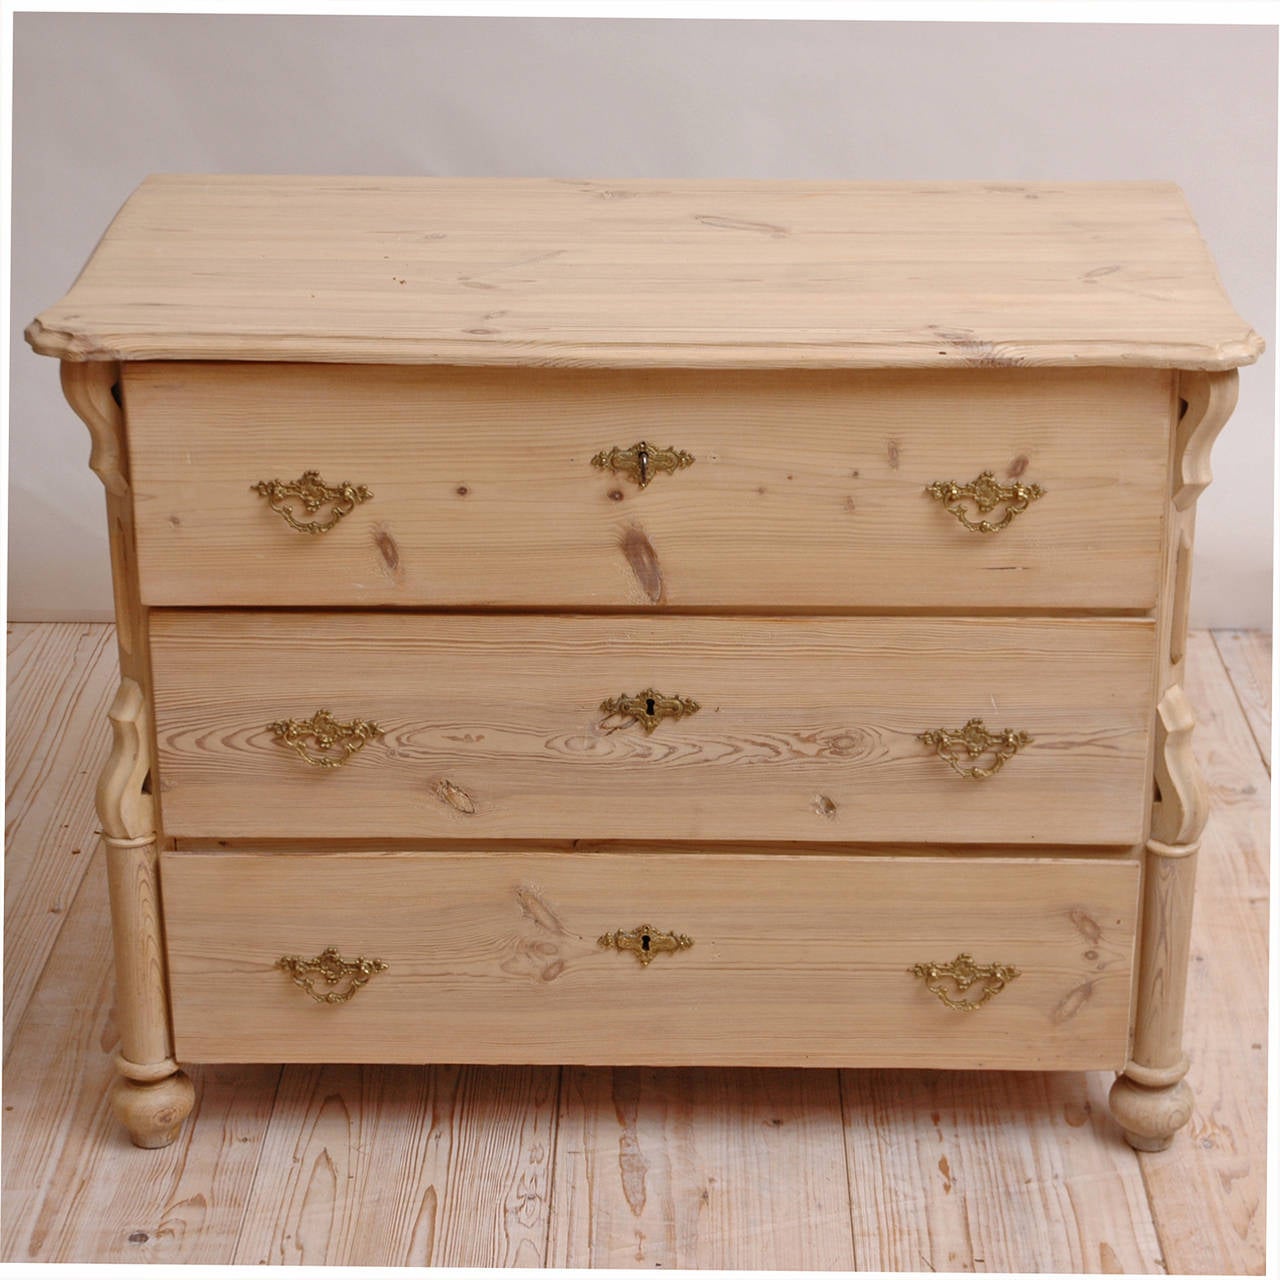 A charming chest with three drawers in pine with a limed chalk and lye finish. Offers brass pulls and key plates and working locks and key, Germany, circa 1850. May be used as a nightstand or an end table along-side of a daybed or sofa.

Measures: